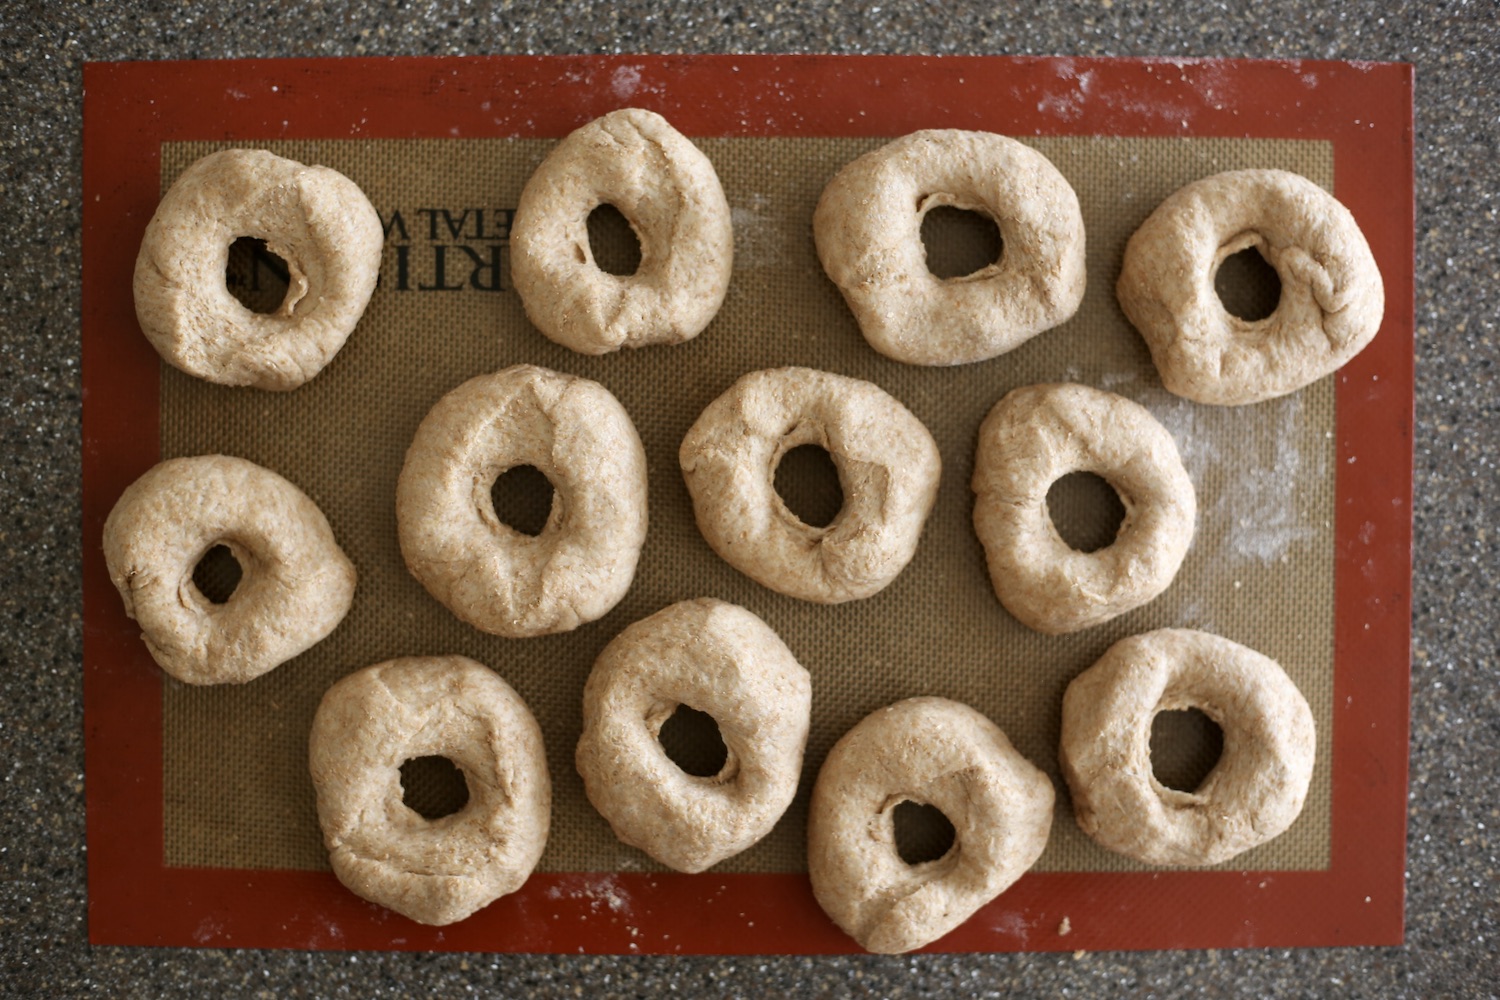 12 bagel shaped pieces of dough